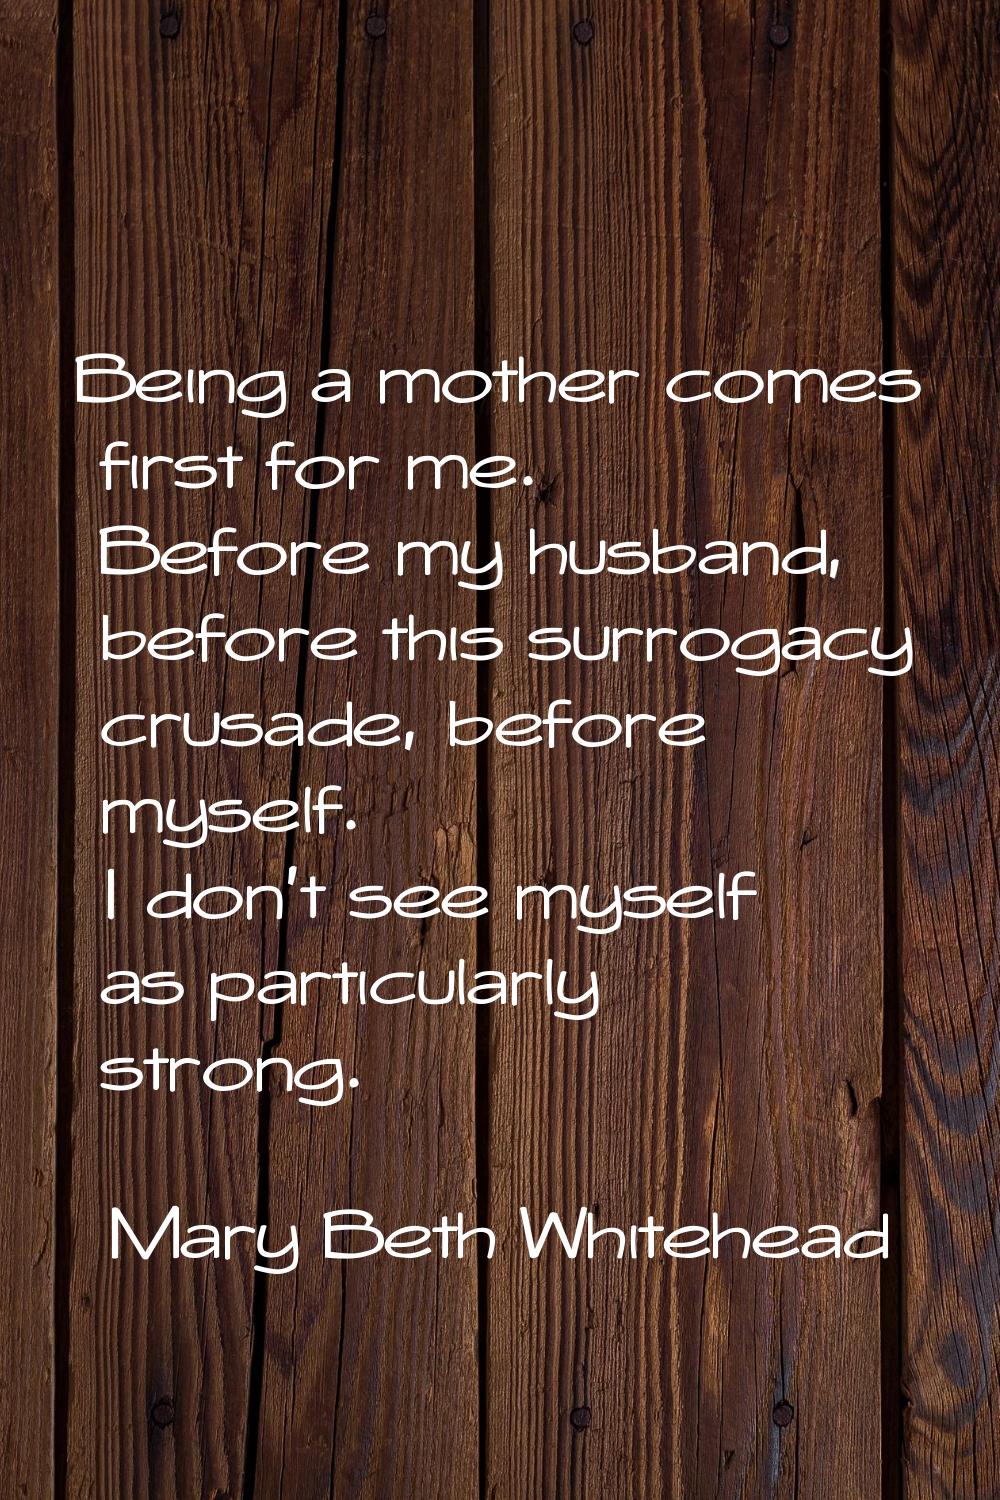 Being a mother comes first for me. Before my husband, before this surrogacy crusade, before myself.